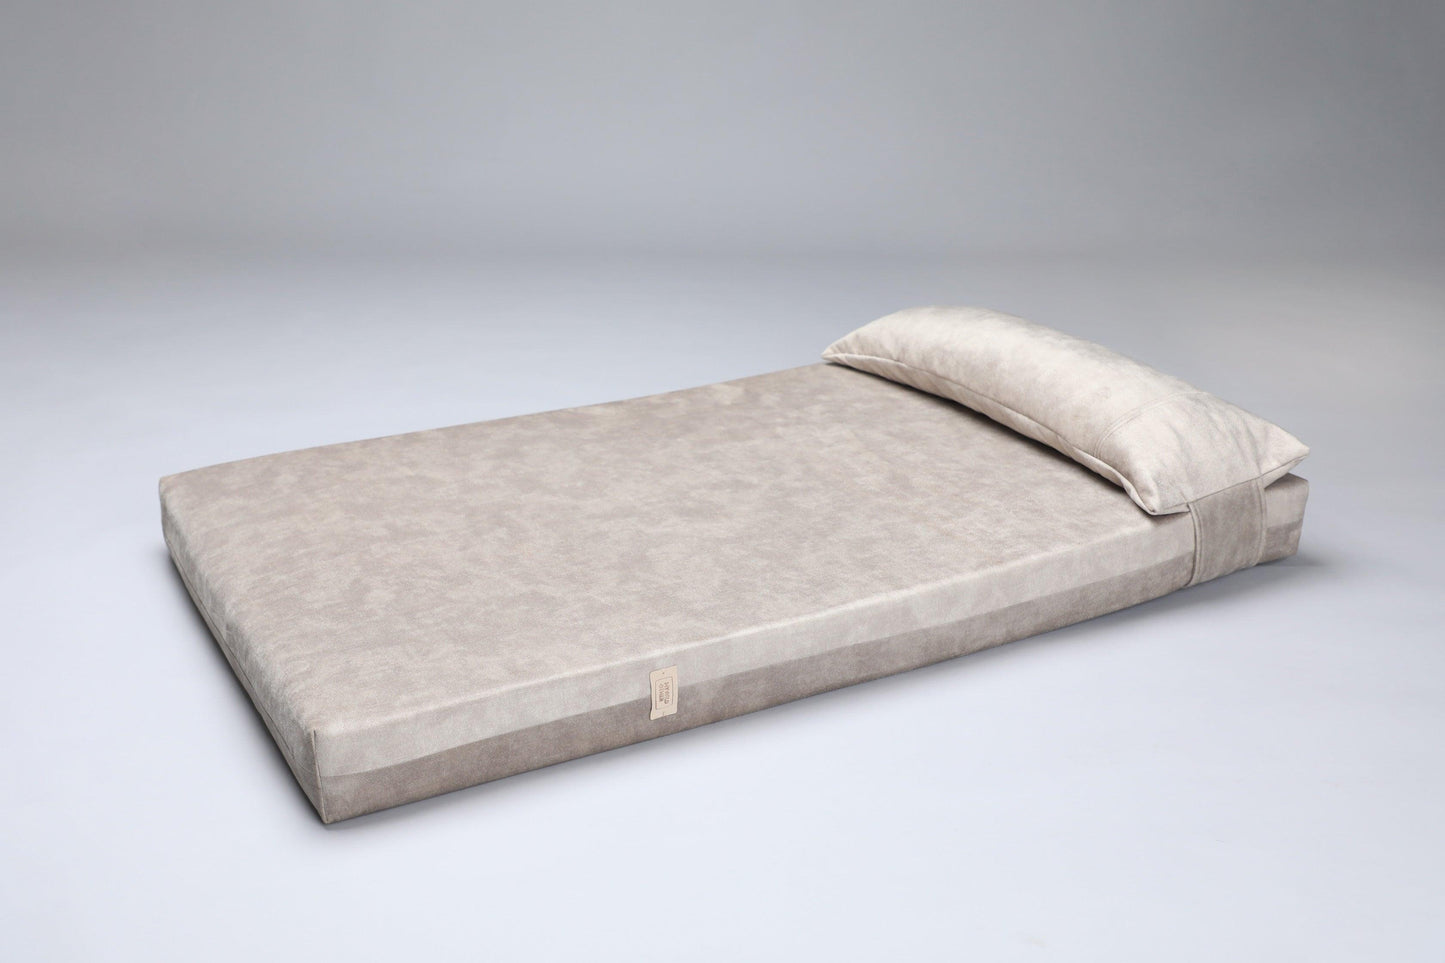 Dog bed for large dogs | Extra comfort & support | 2-sided | BEIGE - premium dog goods handmade in Europe by My Wild Other